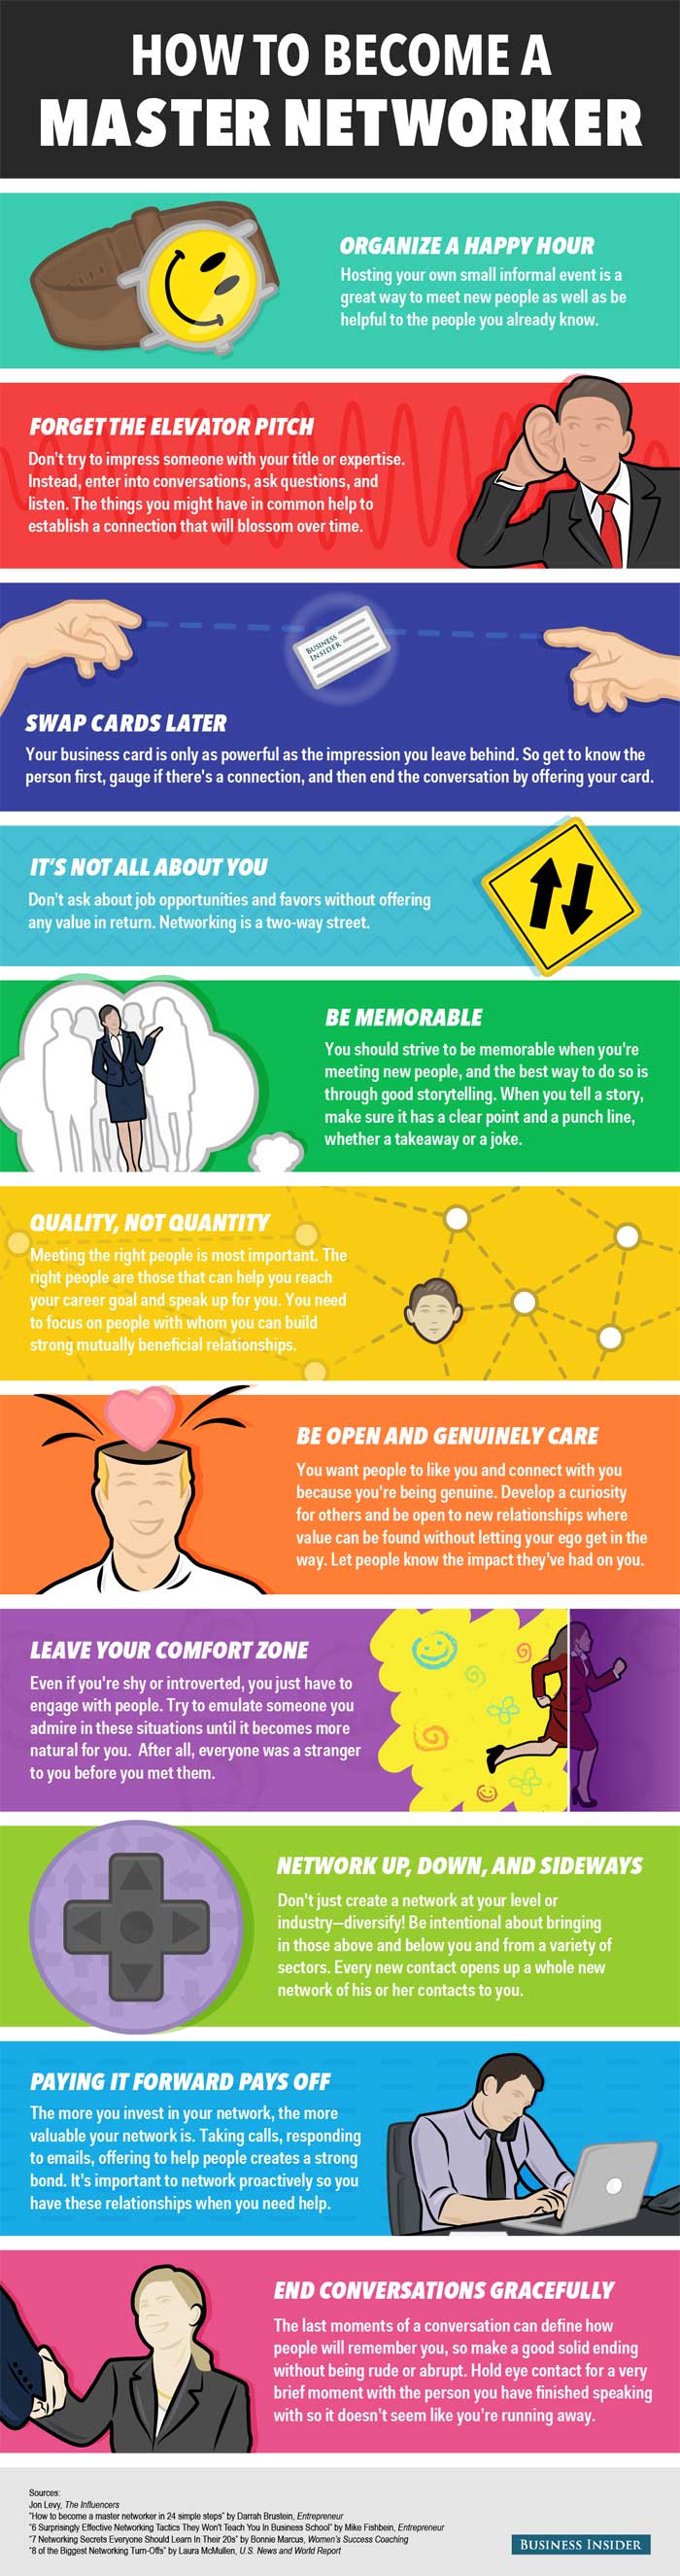 Infographic - 10 Ways to Test Your Networking Skills